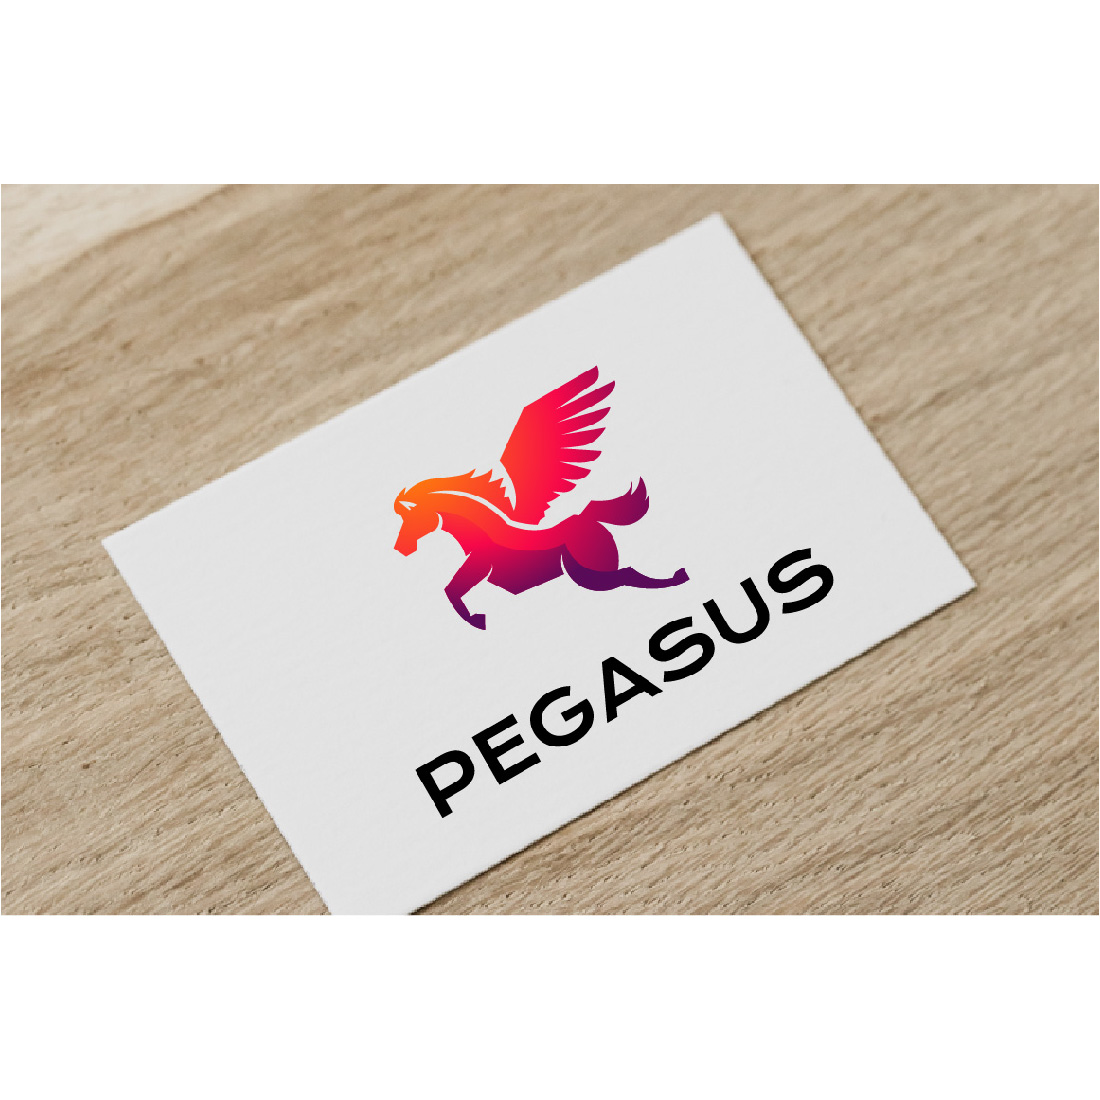 Great Pegasus Flying Jumping Winged Horse Logo cover image.